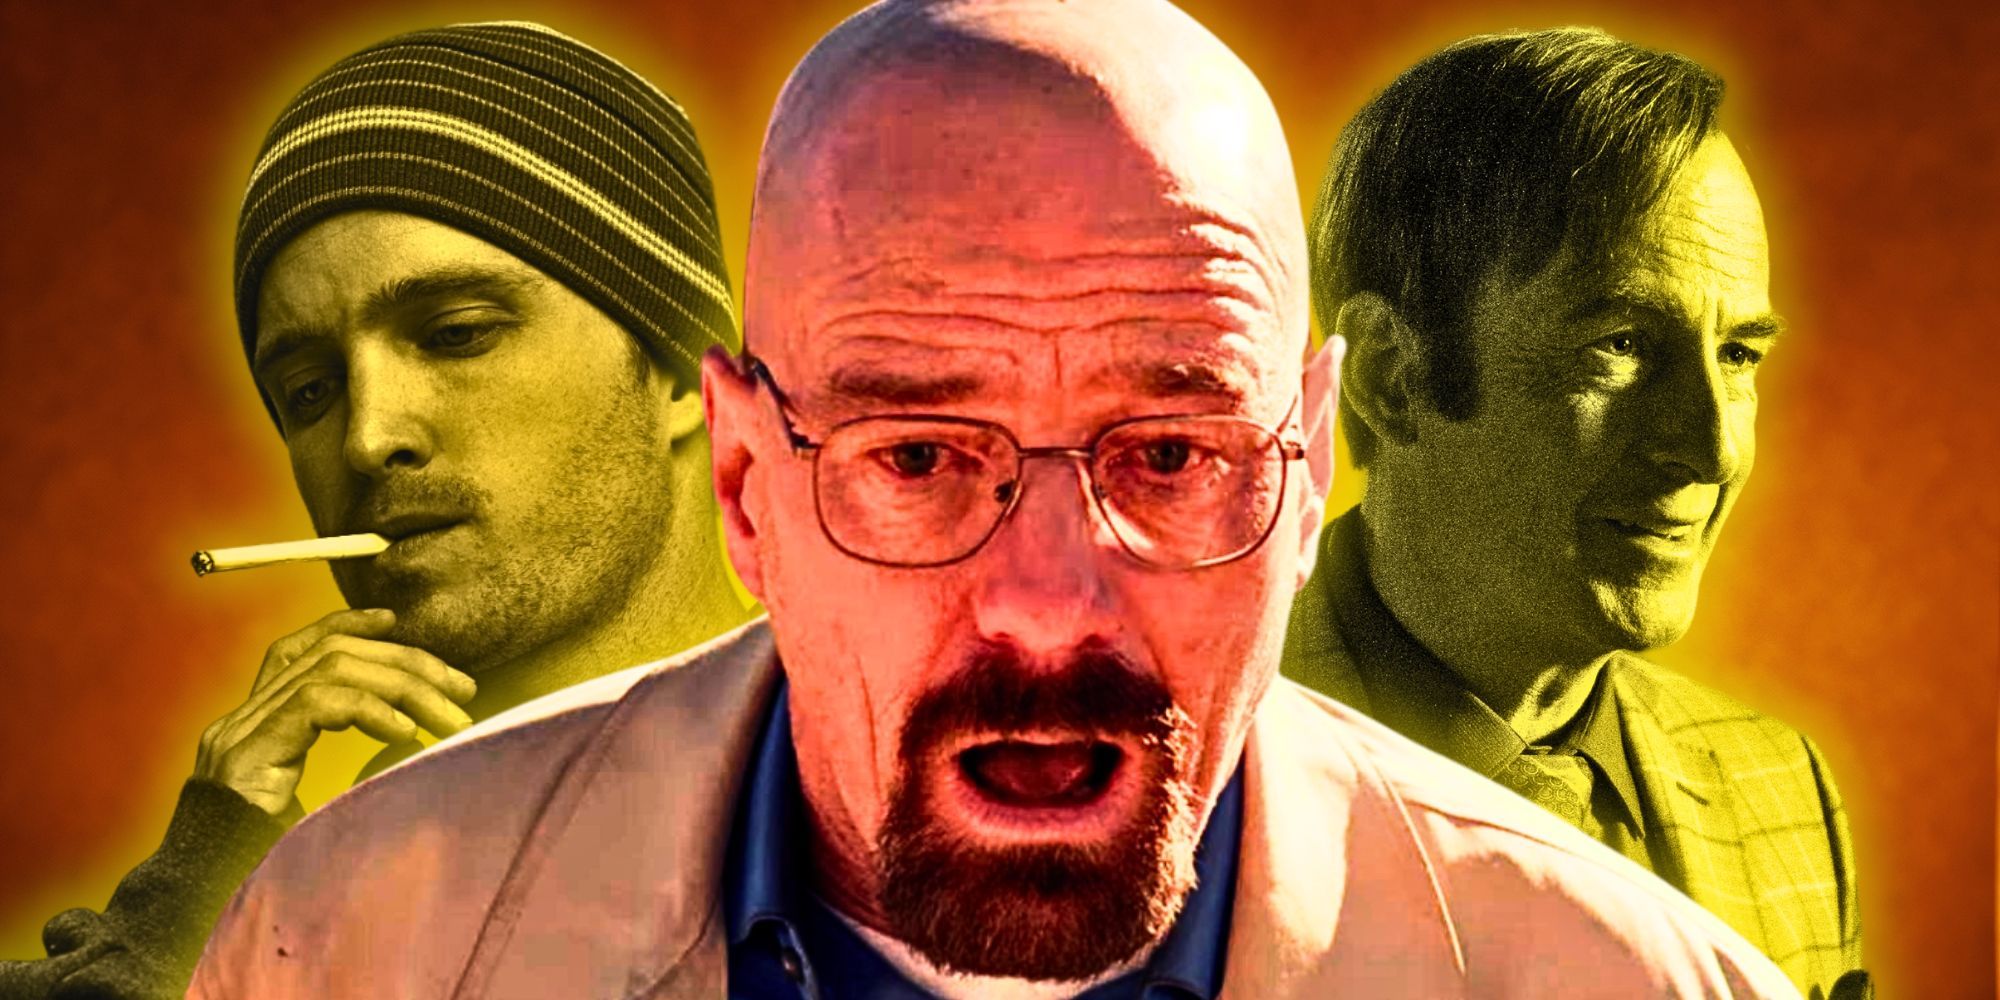 10 Breaking Bad Scenes That Hit Different After Better Call Saul